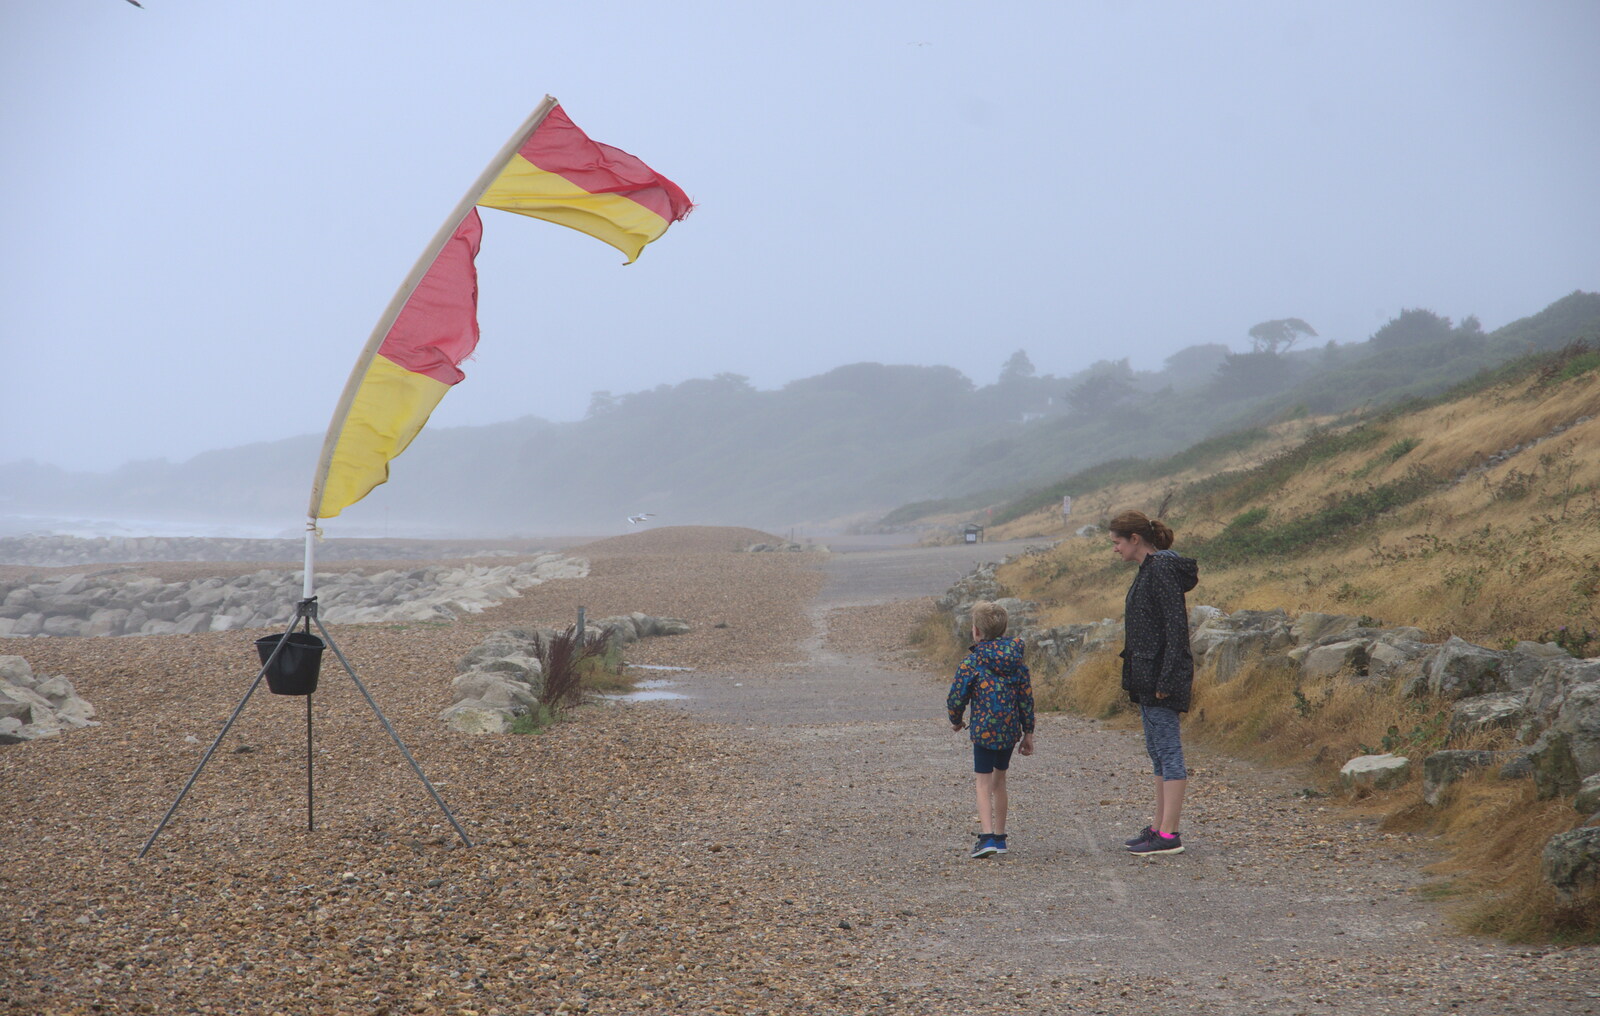 The flag is getting ripped up by the wind from Blustery Beach Trips, Walkford and Highcliffe, Dorset - 29th July 2018